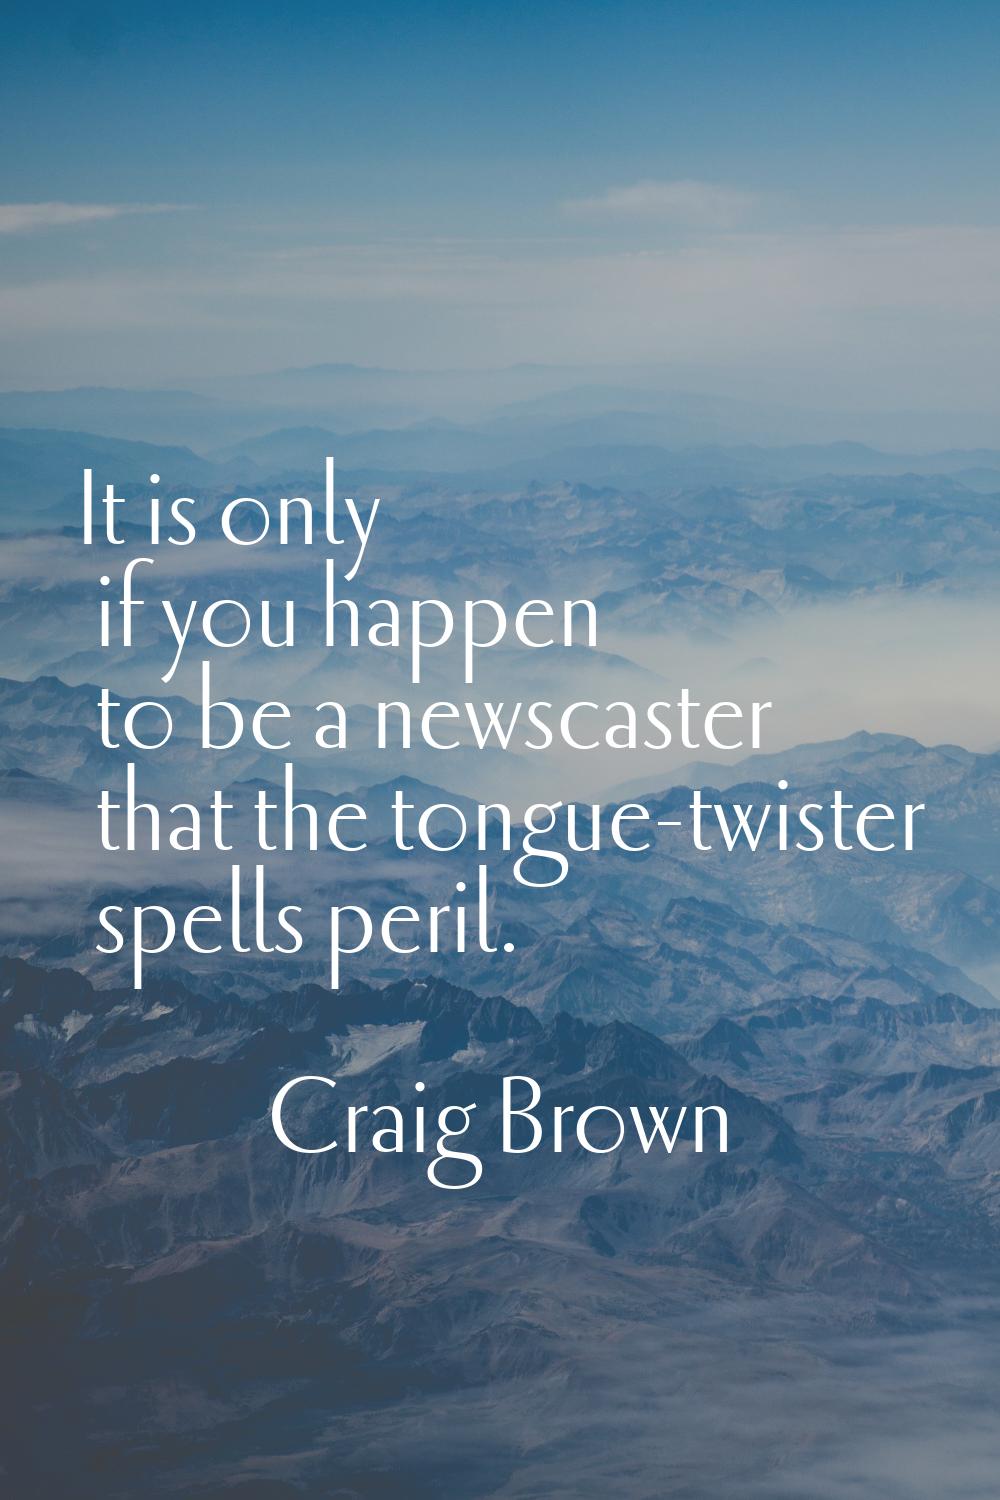 It is only if you happen to be a newscaster that the tongue-twister spells peril.